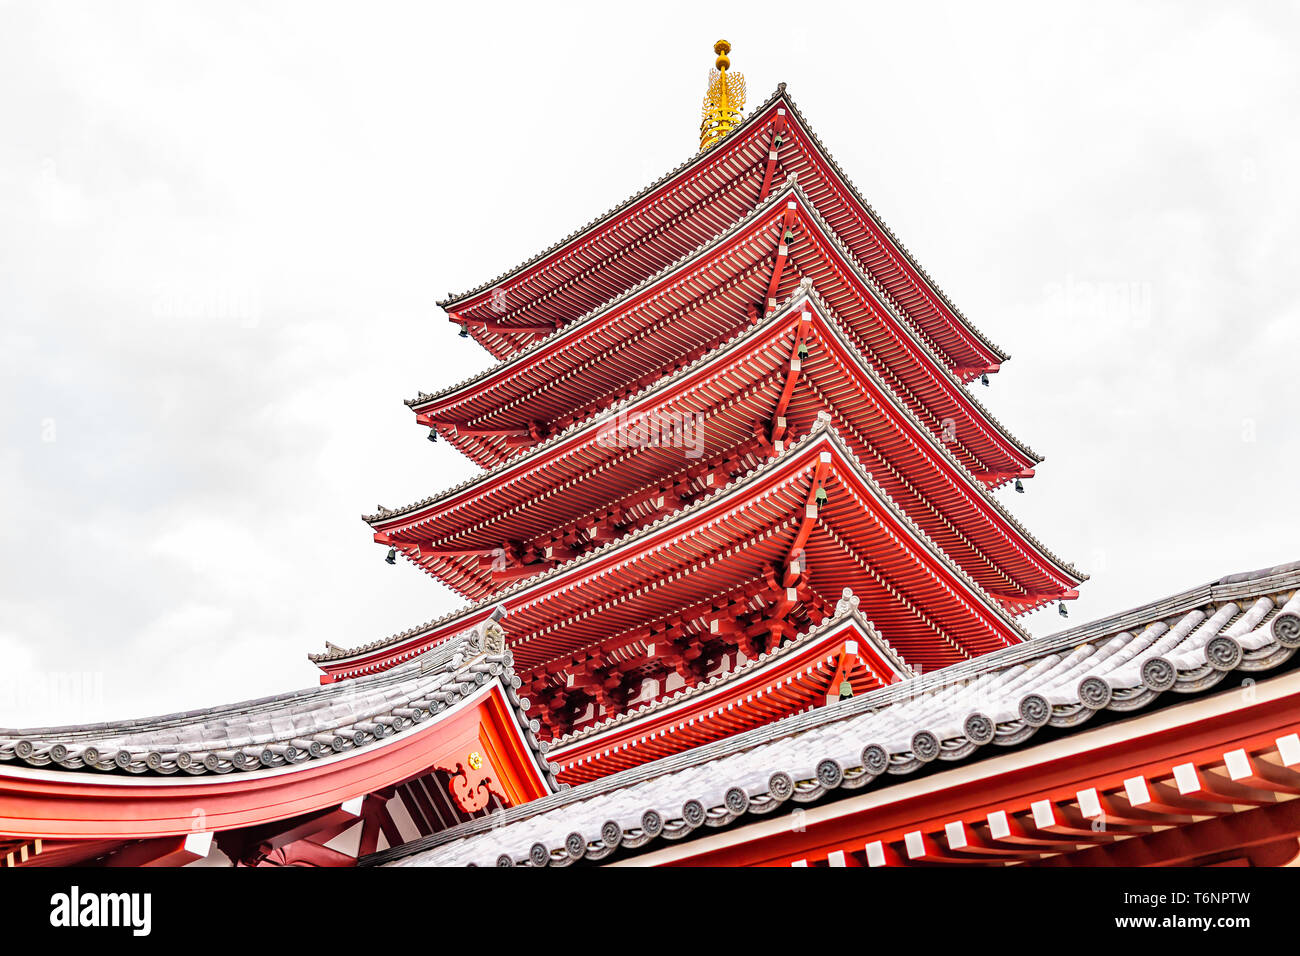 Tokyo, Japan Asakusa with low angle pagoda roof view of Sensoji temple shrine with red architecture on cloudy day Stock Photo